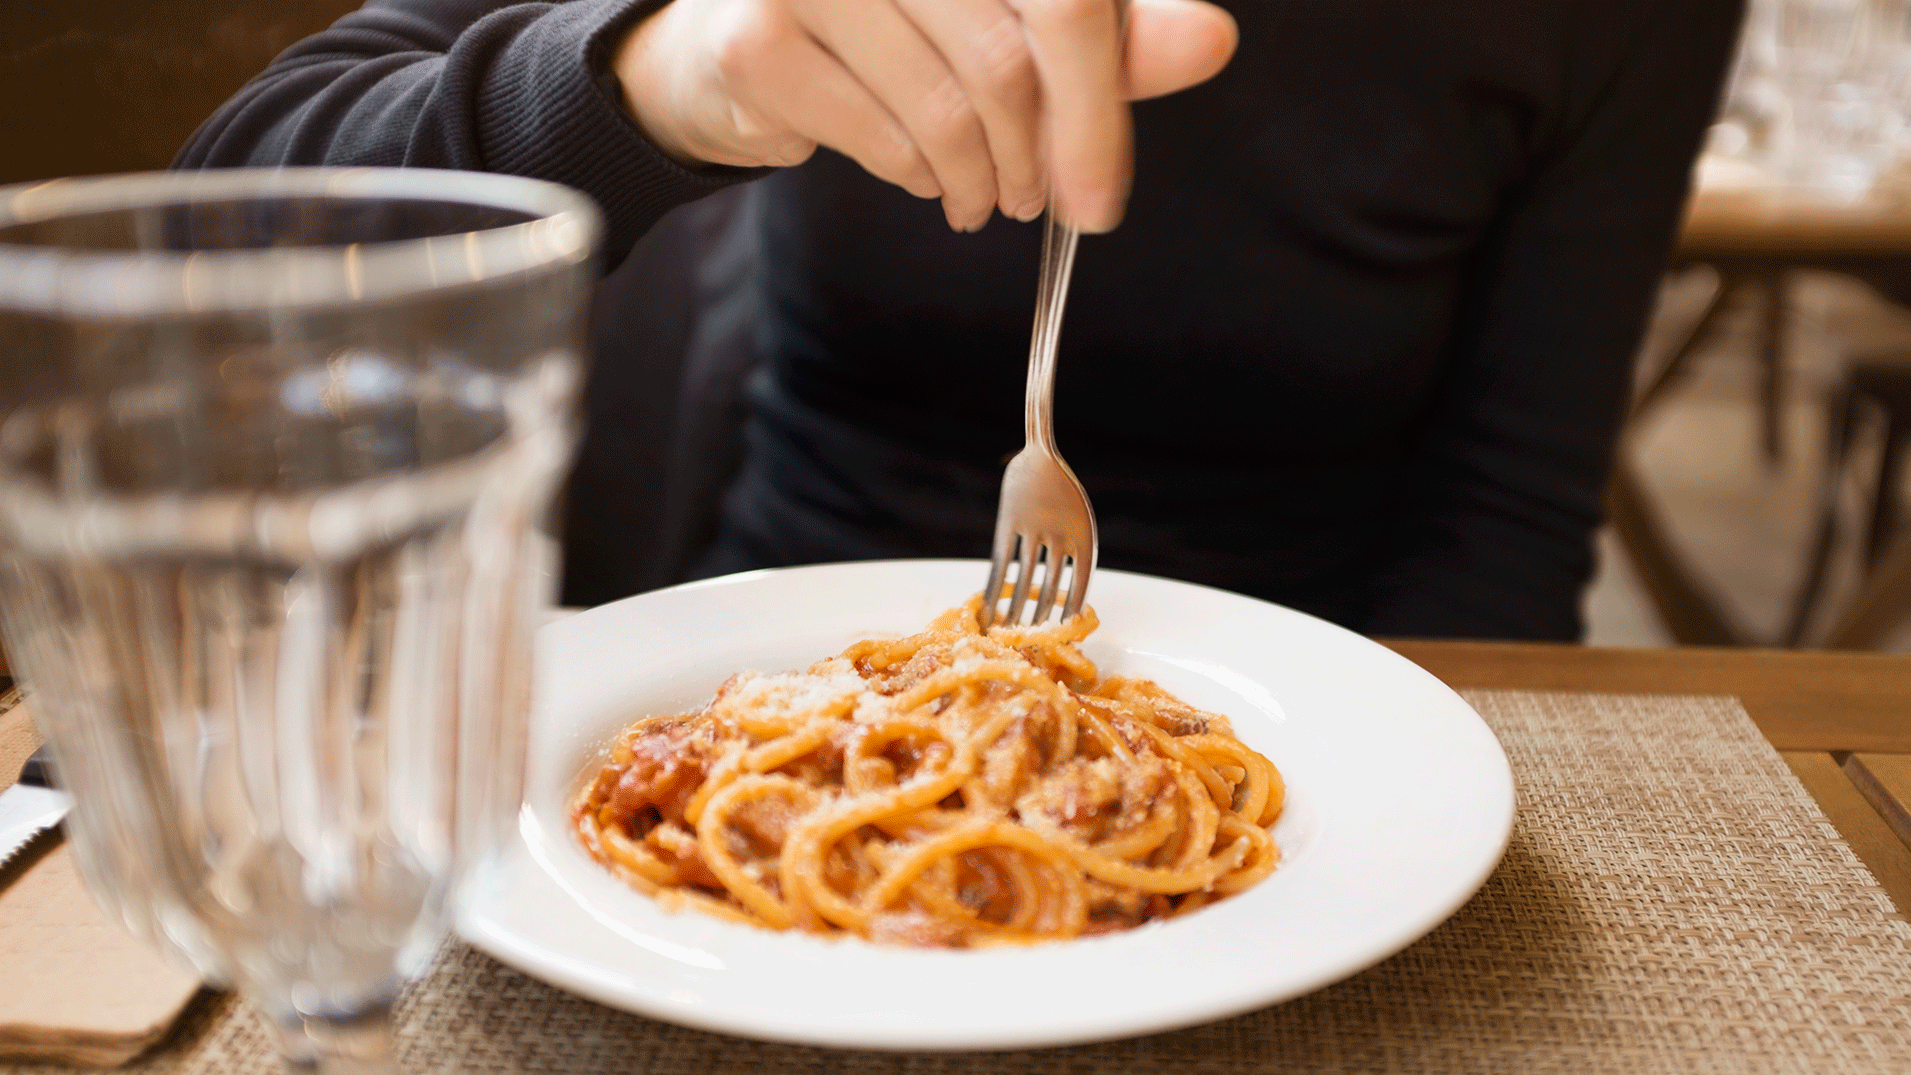 _nf amatriciana food cinemagraph